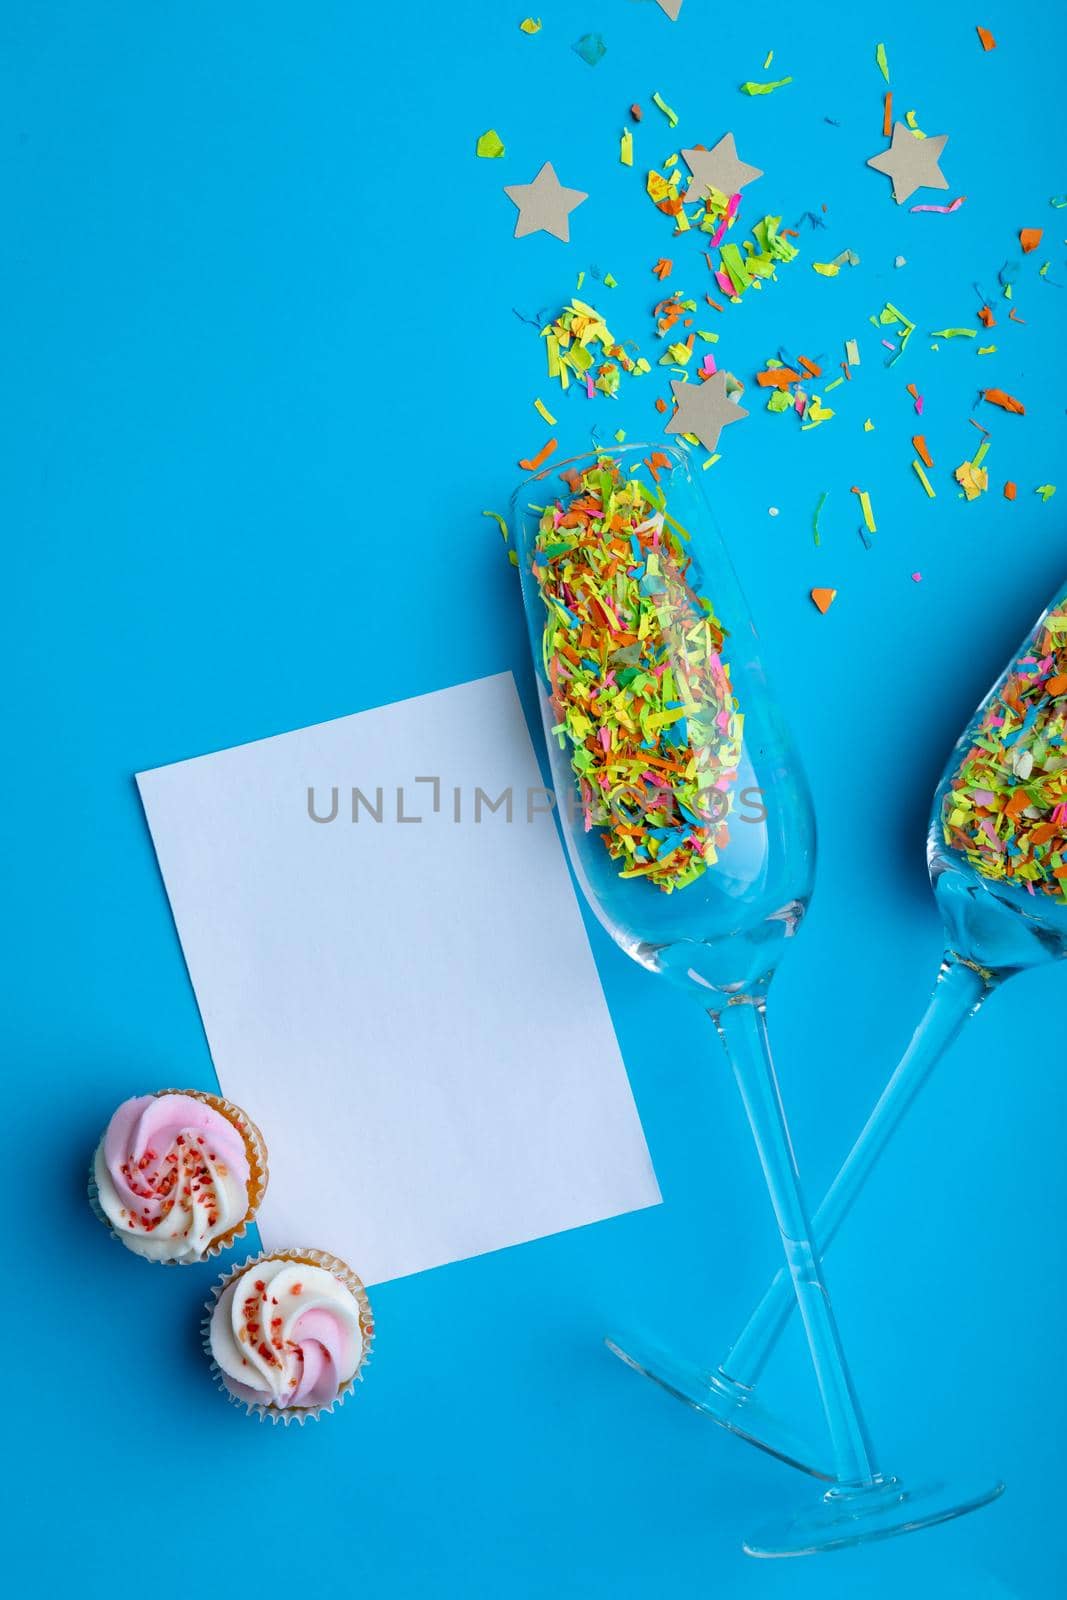 Champagne flutes with confetti by cupcakes and blank paper with copy space on blue background by Wavebreakmedia